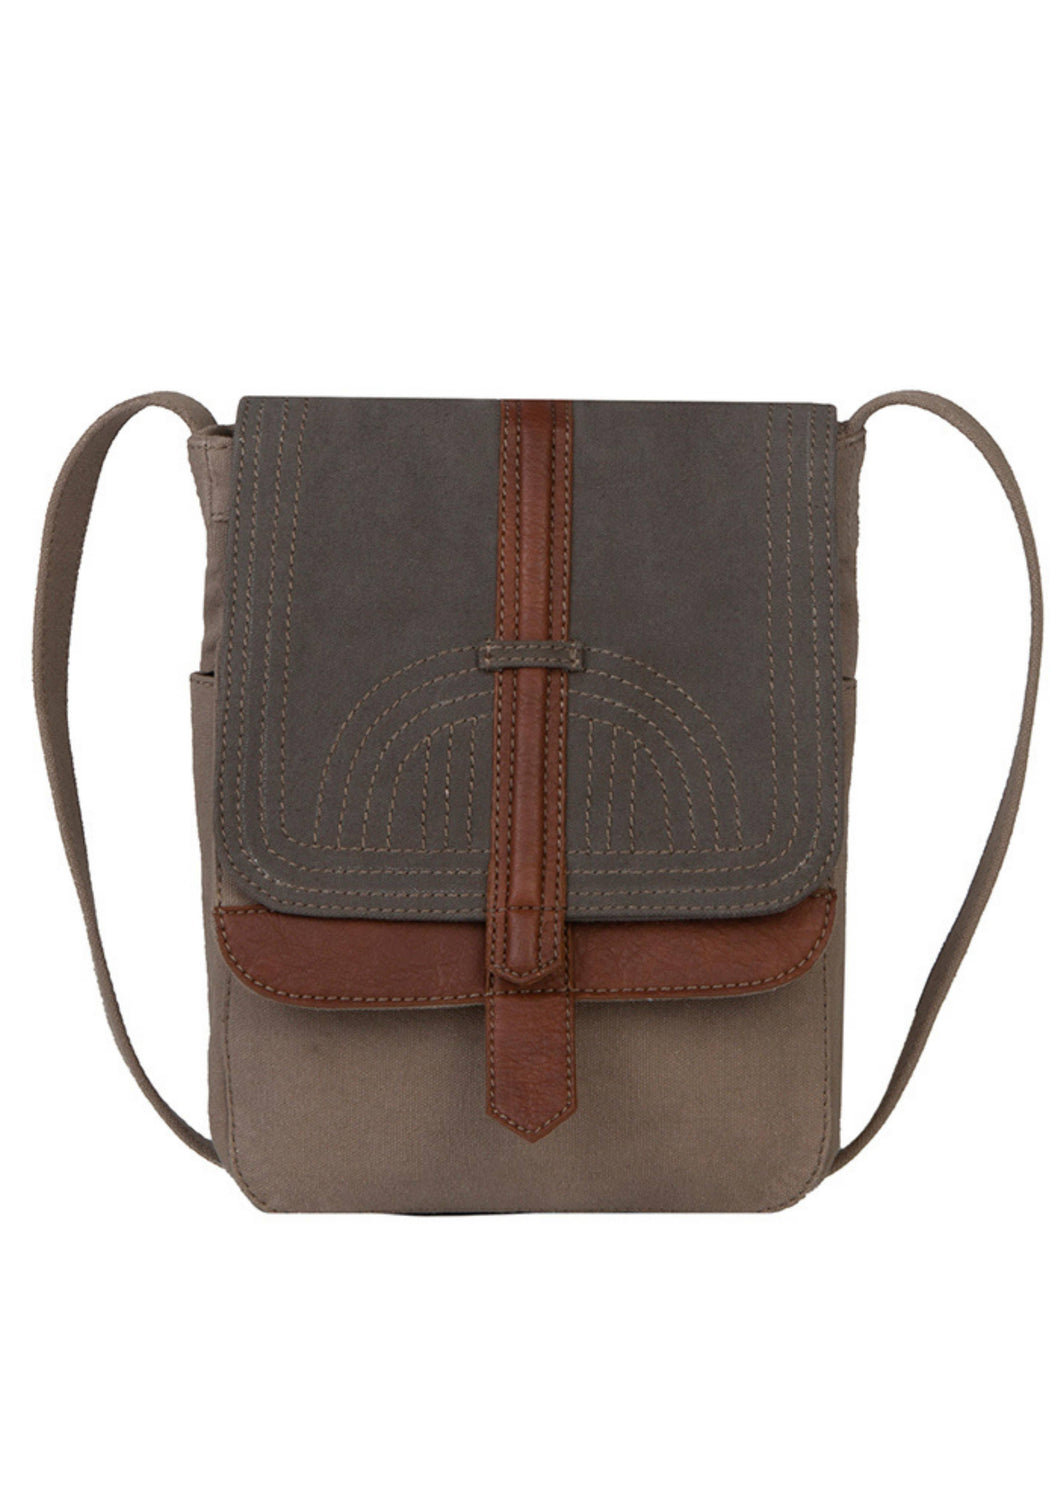 Oakley Goldenrod Up-Cycled Canvas Cross-body, M-5305